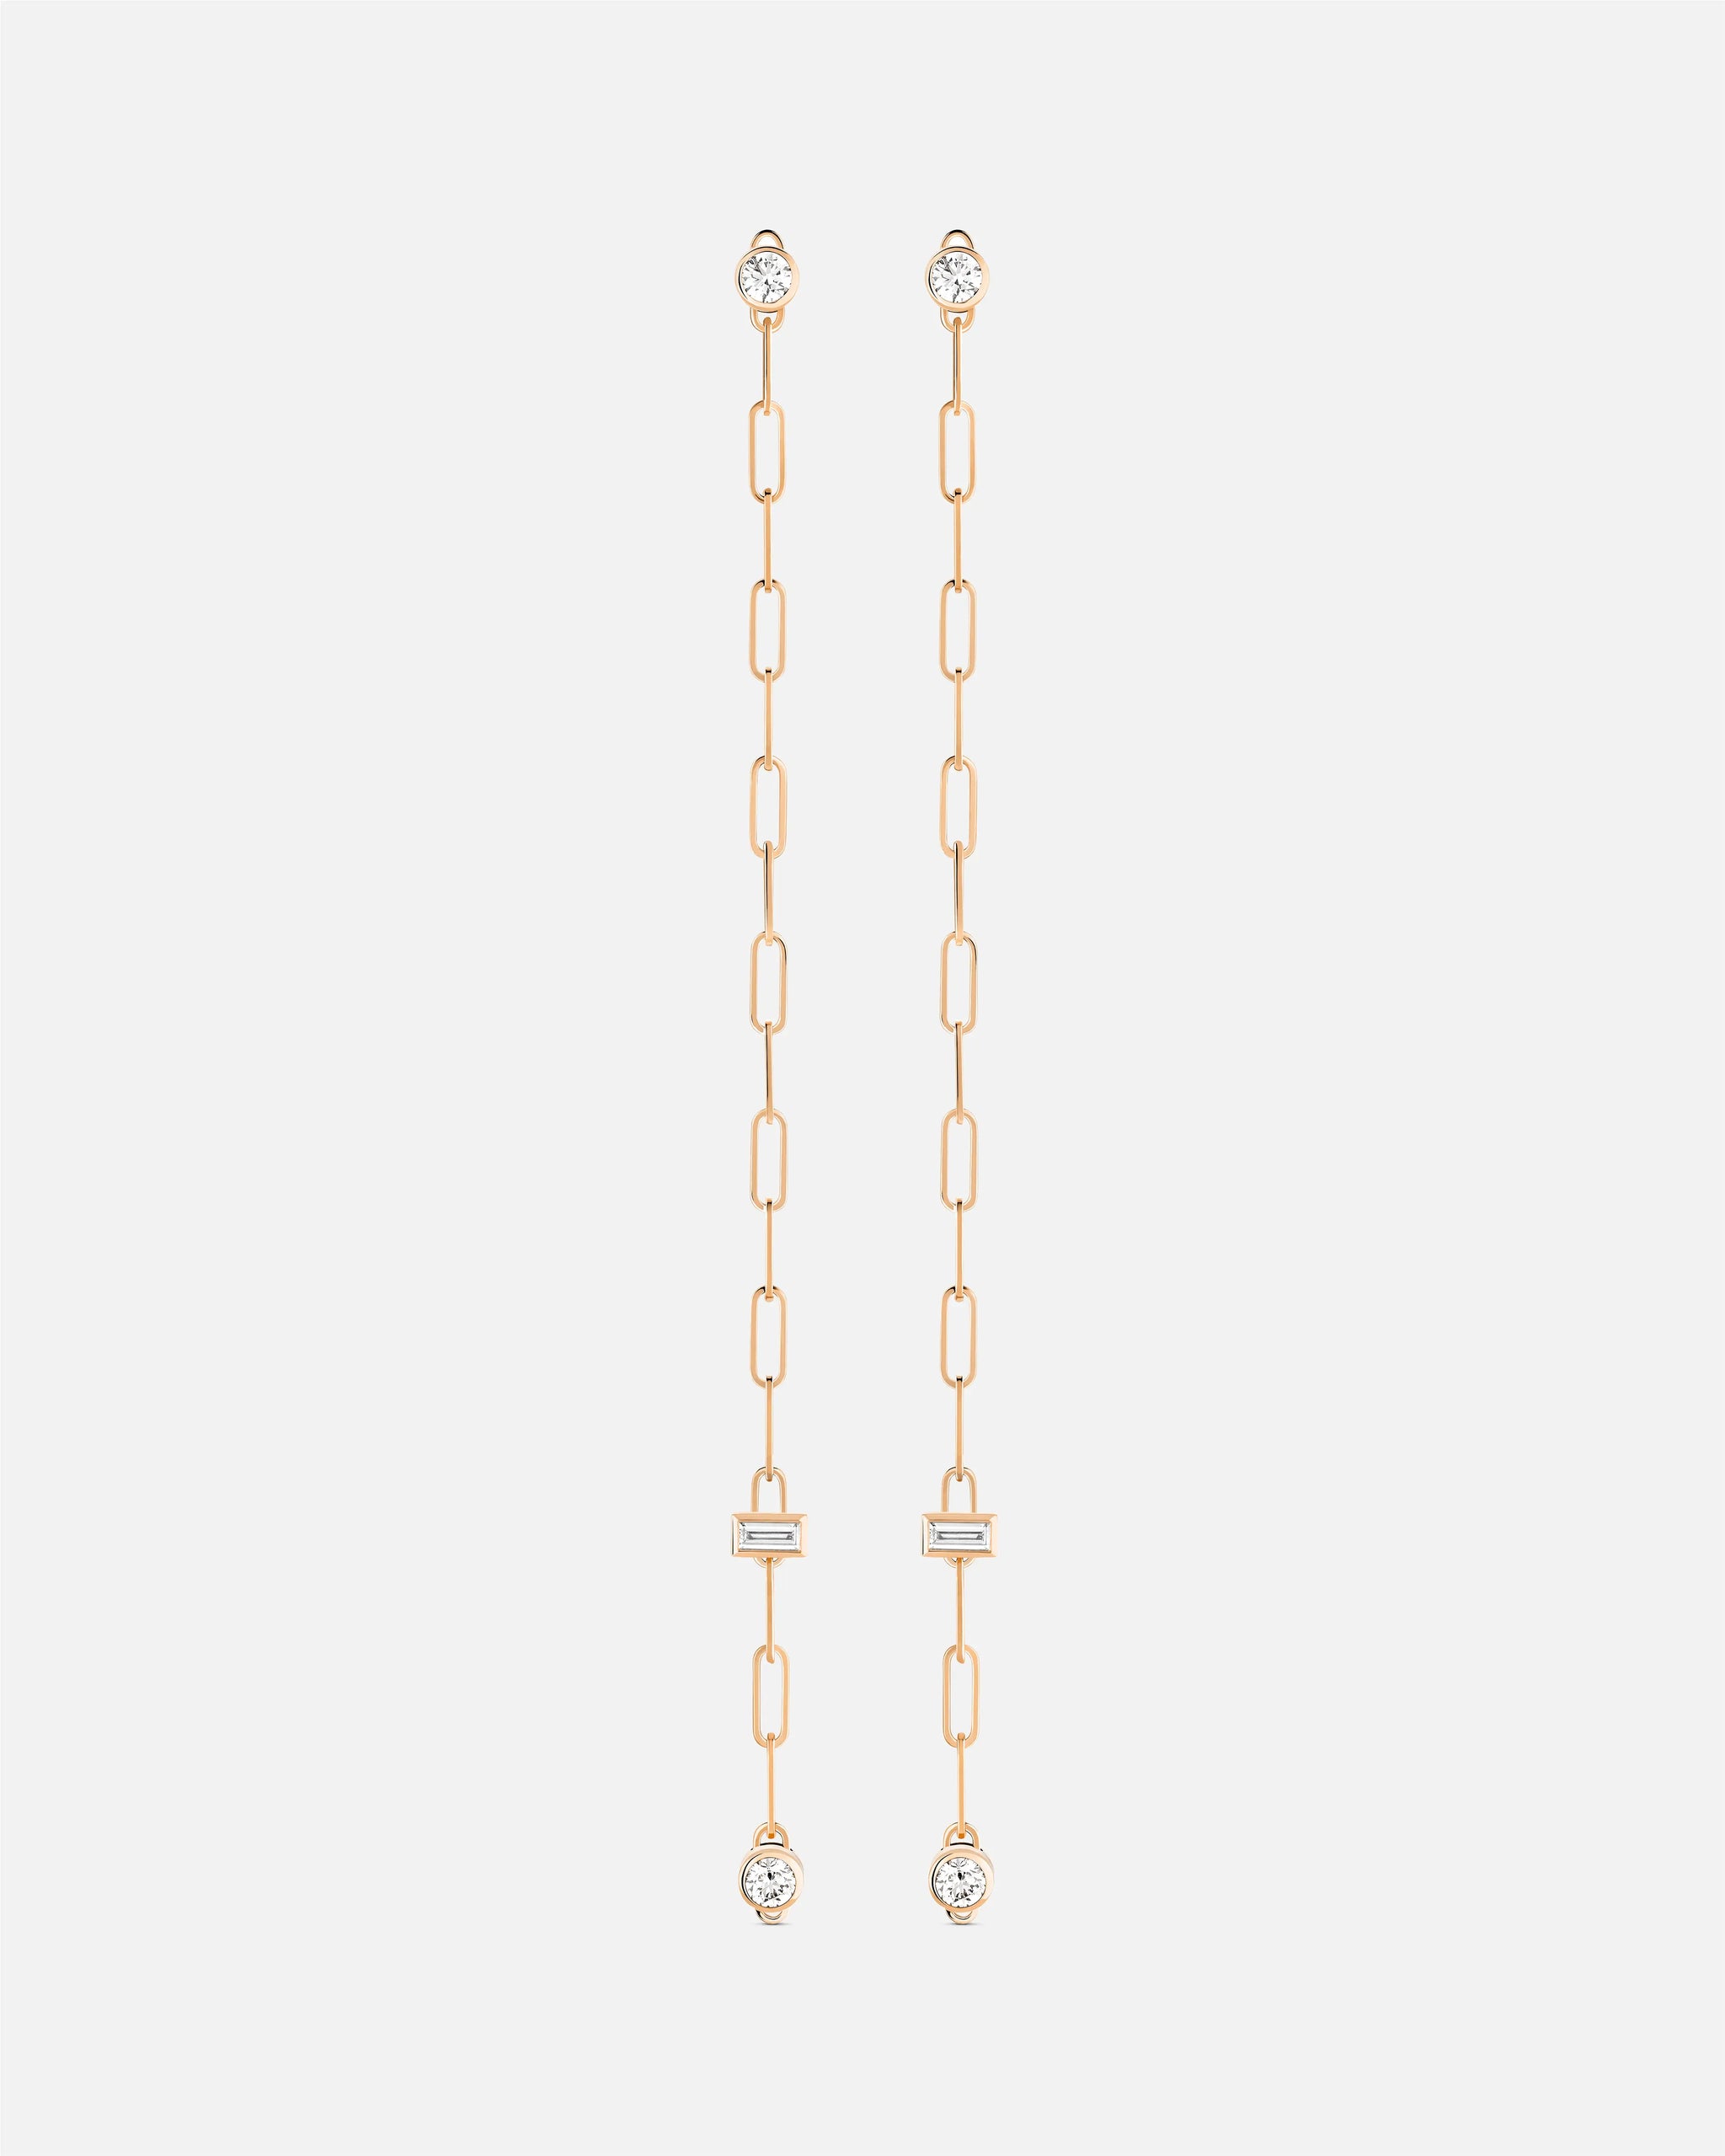 Baguette Round GM Classics Earrings in Rose Gold - 1 - Nouvel Heritage